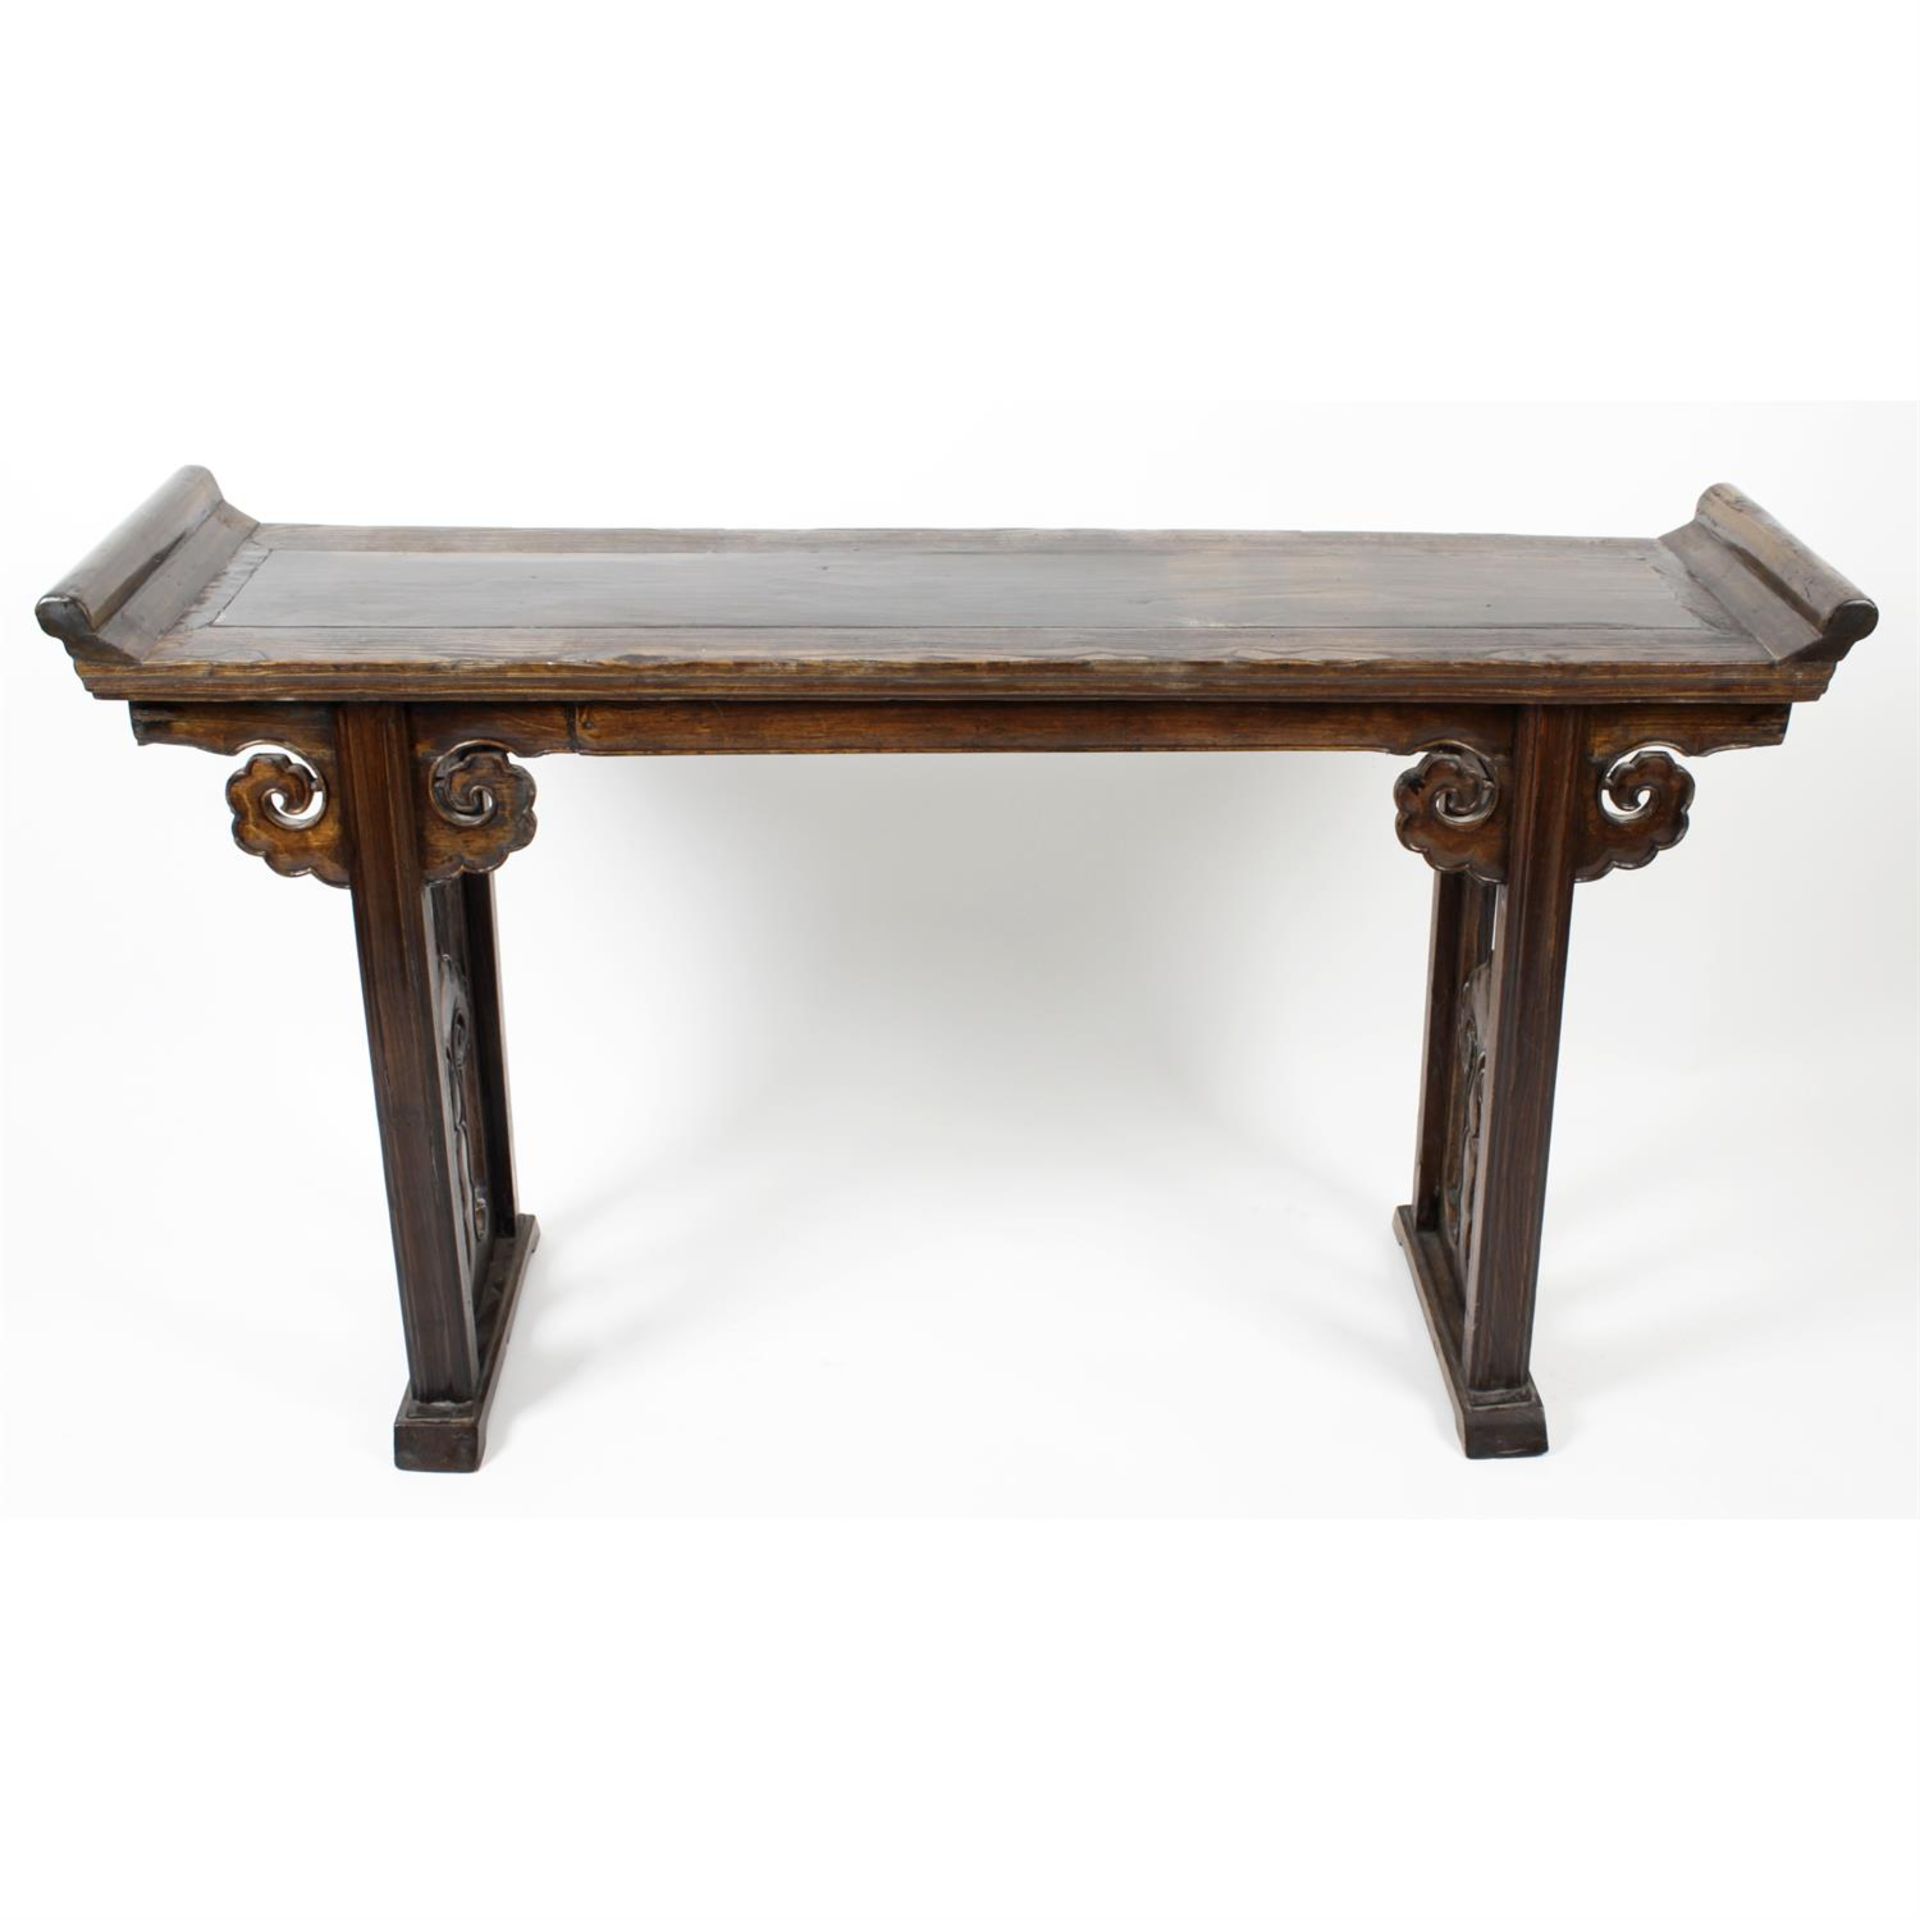 A Chinese carved hardwood altar table.